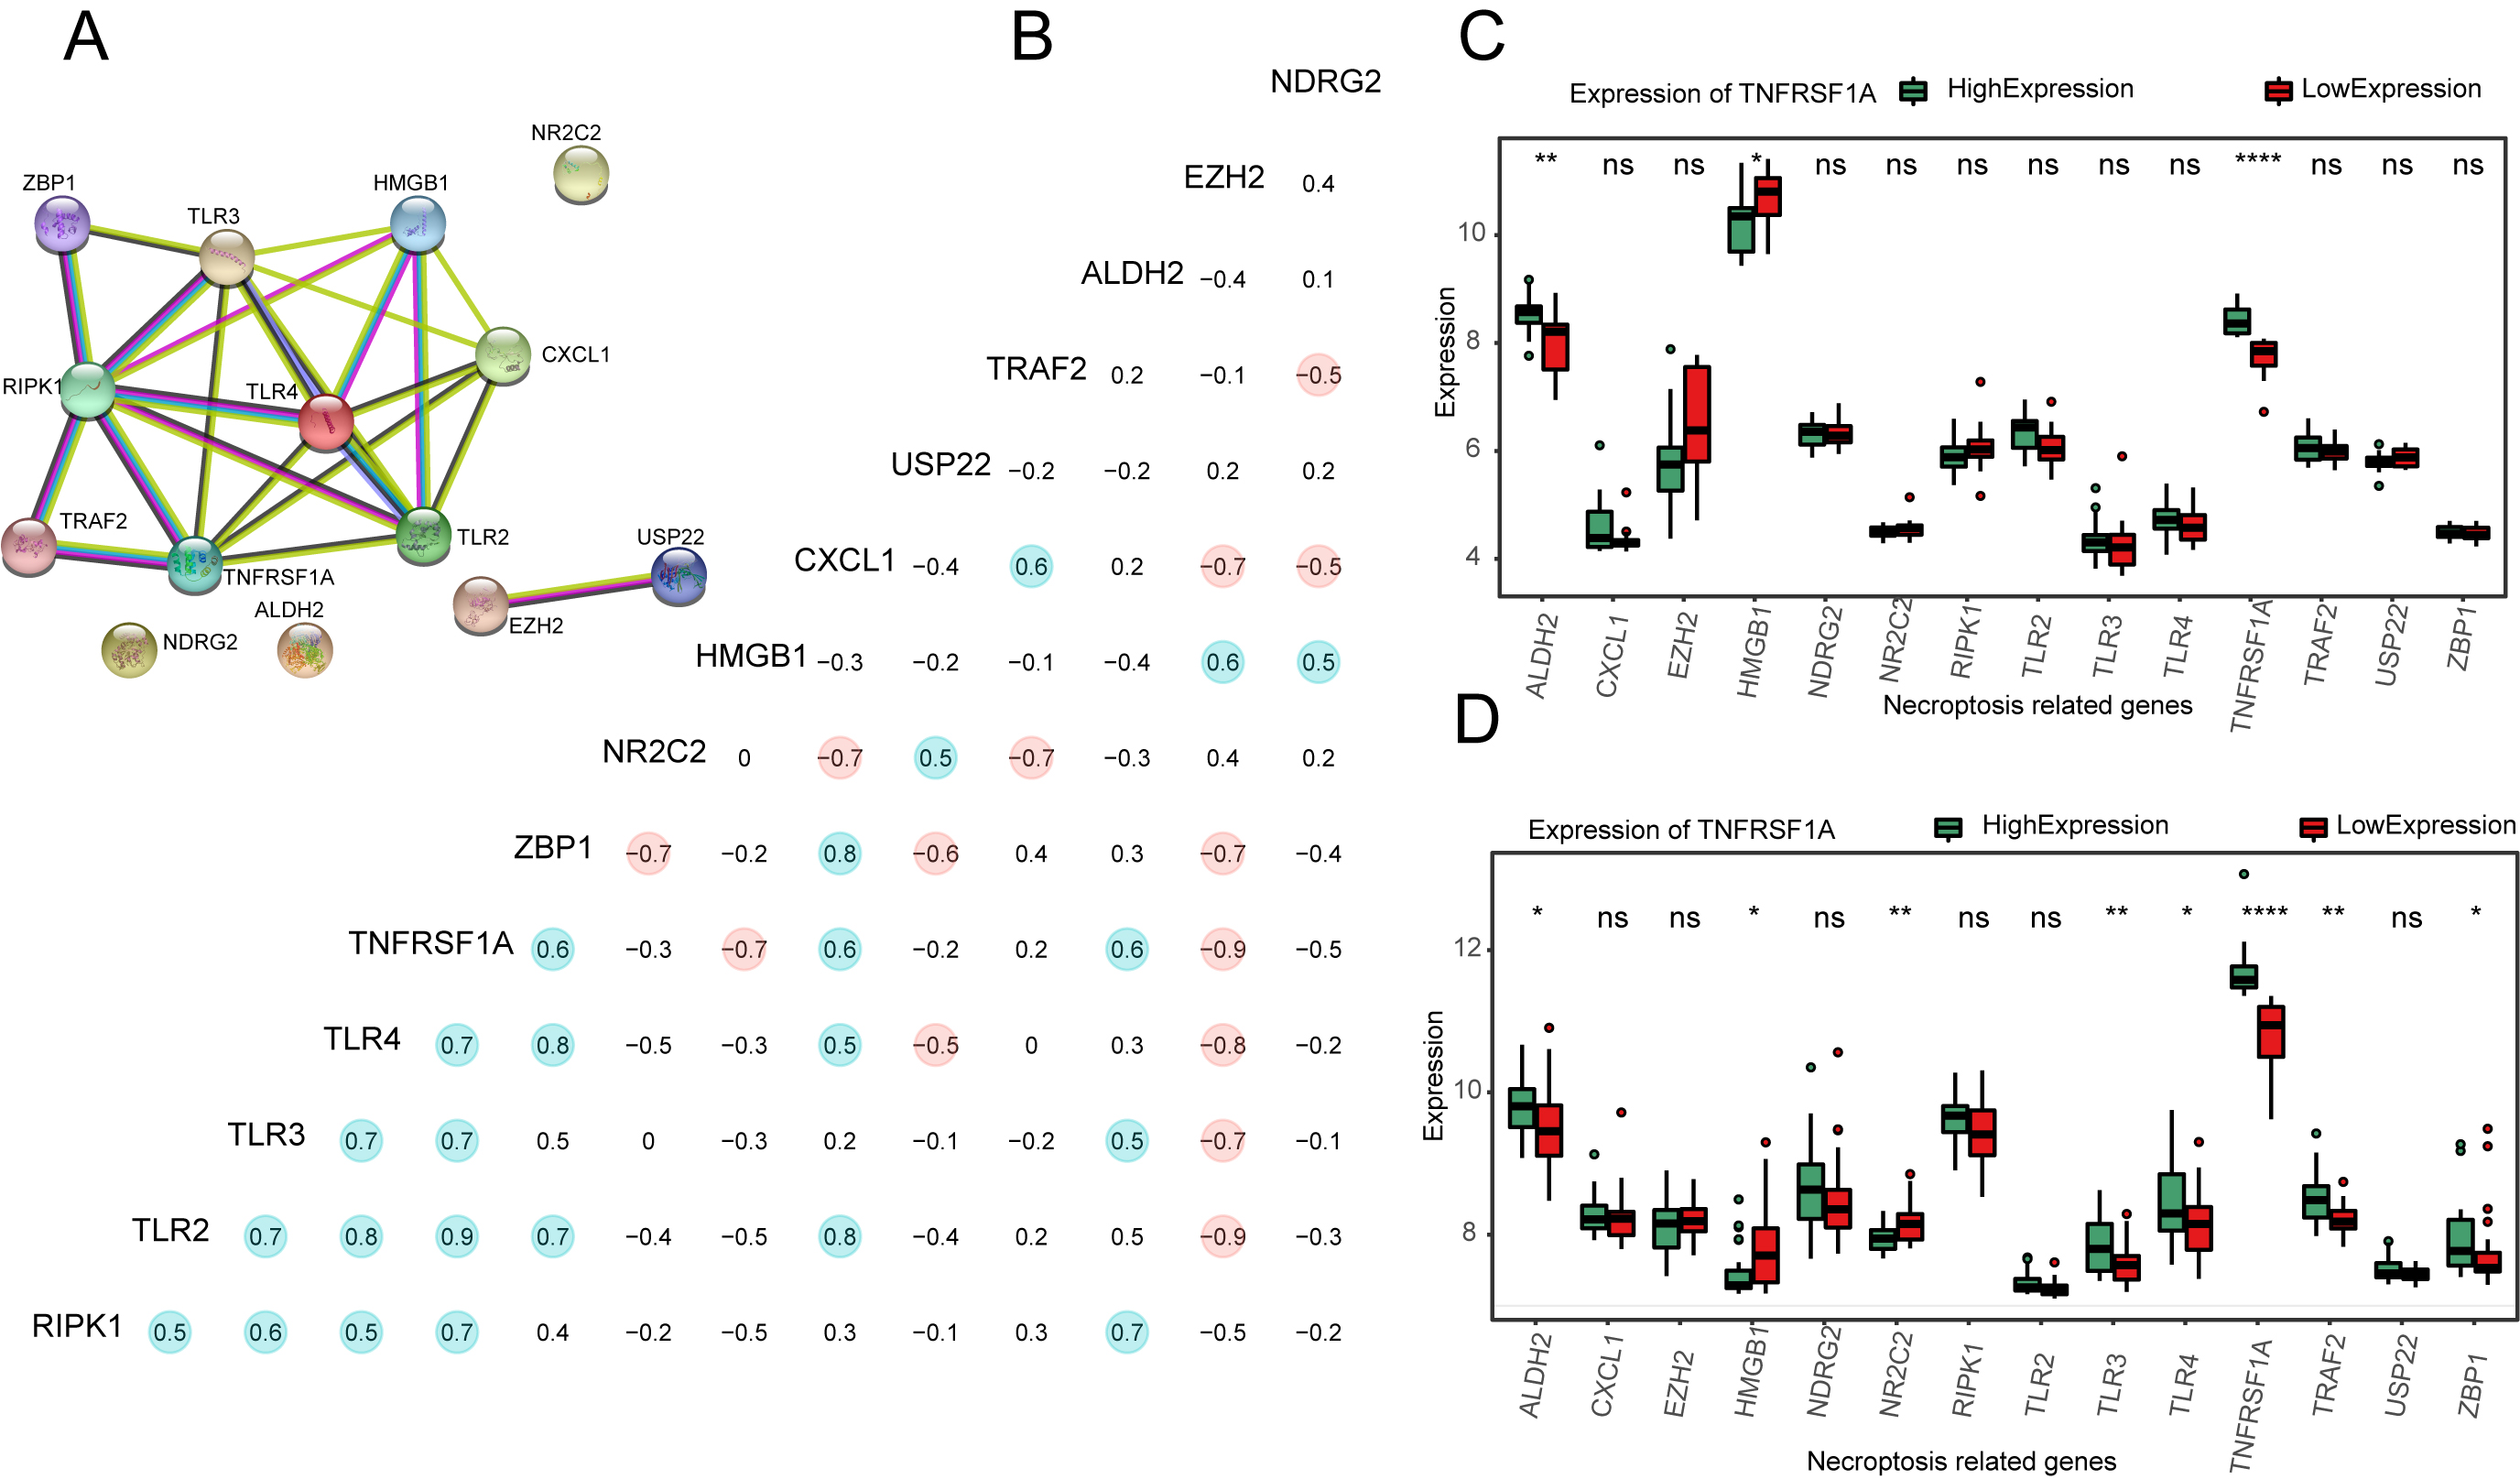 Effect of TNFRSF1A expression grouping on immunotherapy in three datasets. (a–c) Expression of immune checkpoints CTLA4, LAG3, and TIGIT in the TARGET-OS cohort, GSE16091, and GSE21257 datasets. (d–g) Stromal score (d), immune score (e), estimate score (f), and tumor purity (g) were calculated using the TARGET-OS dataset in both the TNFRSF1A high- and- low-expression groups.